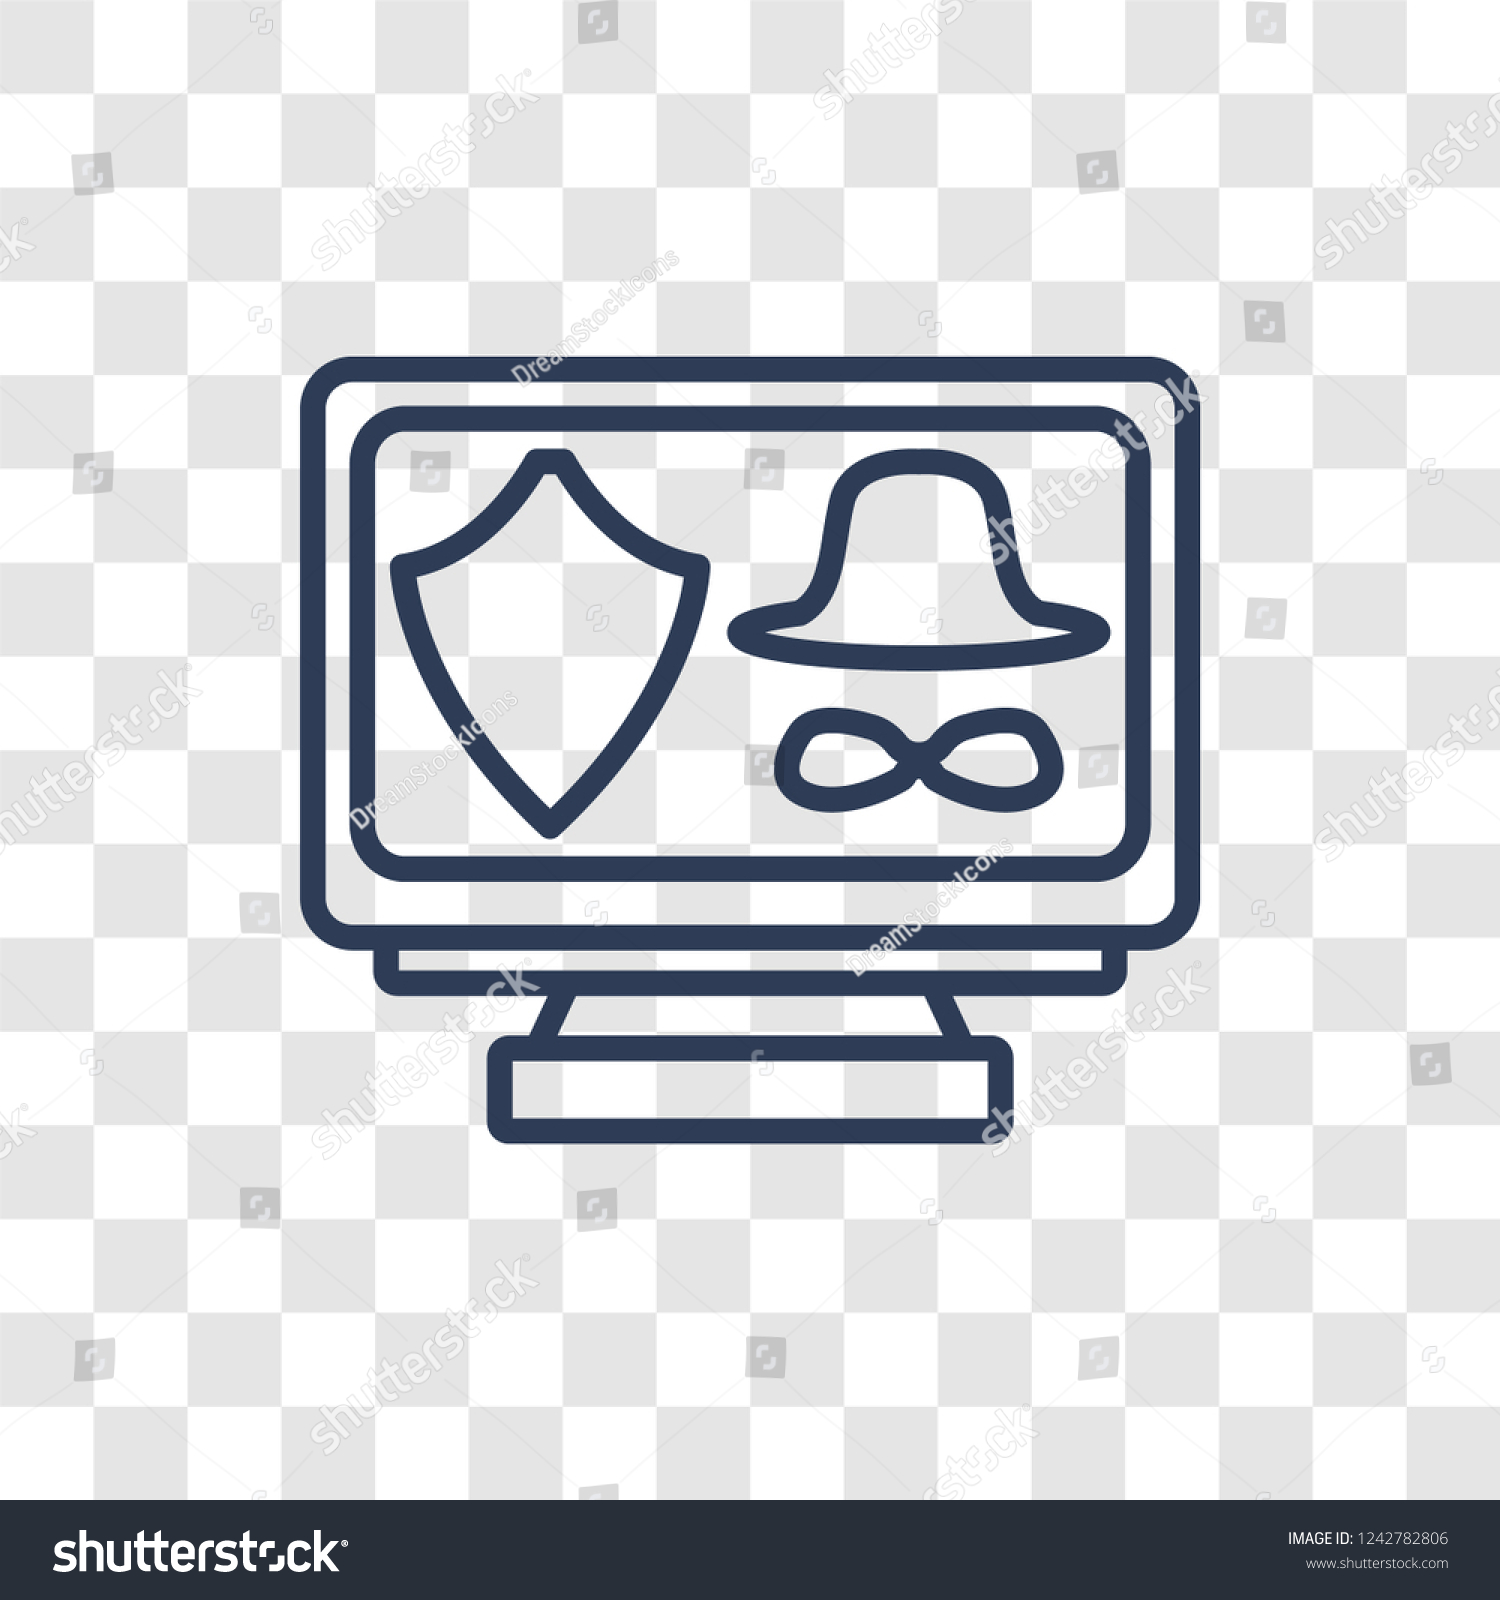 Cyber Security Icon Trendy Linear Cyber Royalty Free Stock Image